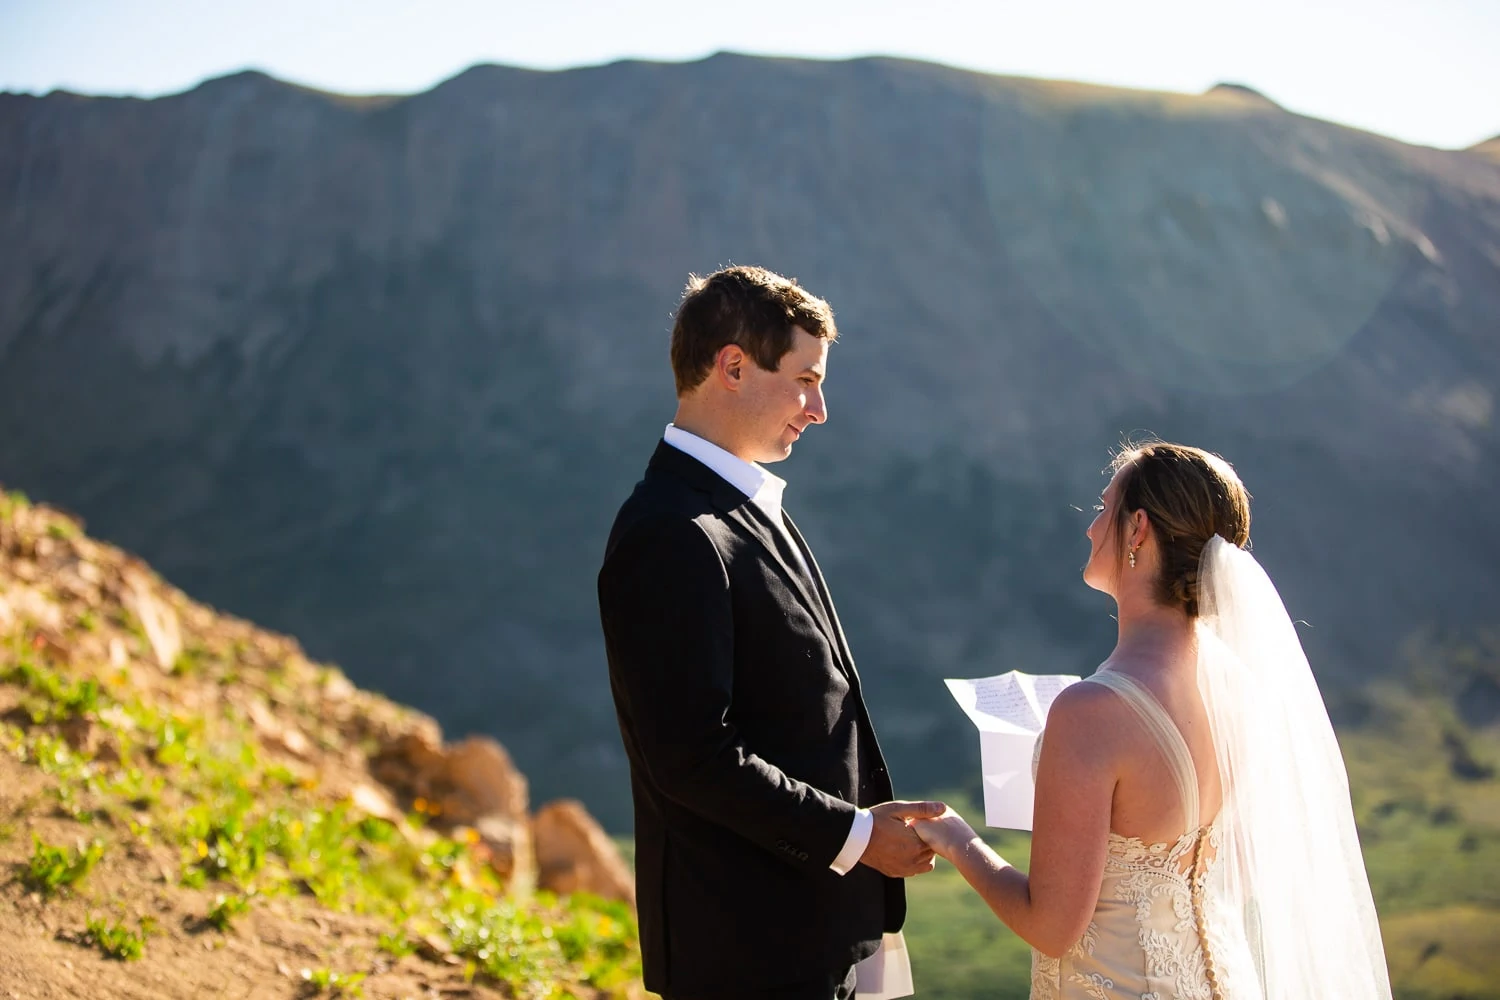 An elopement couple reads hand written vows to each other while hiking in the mountains.